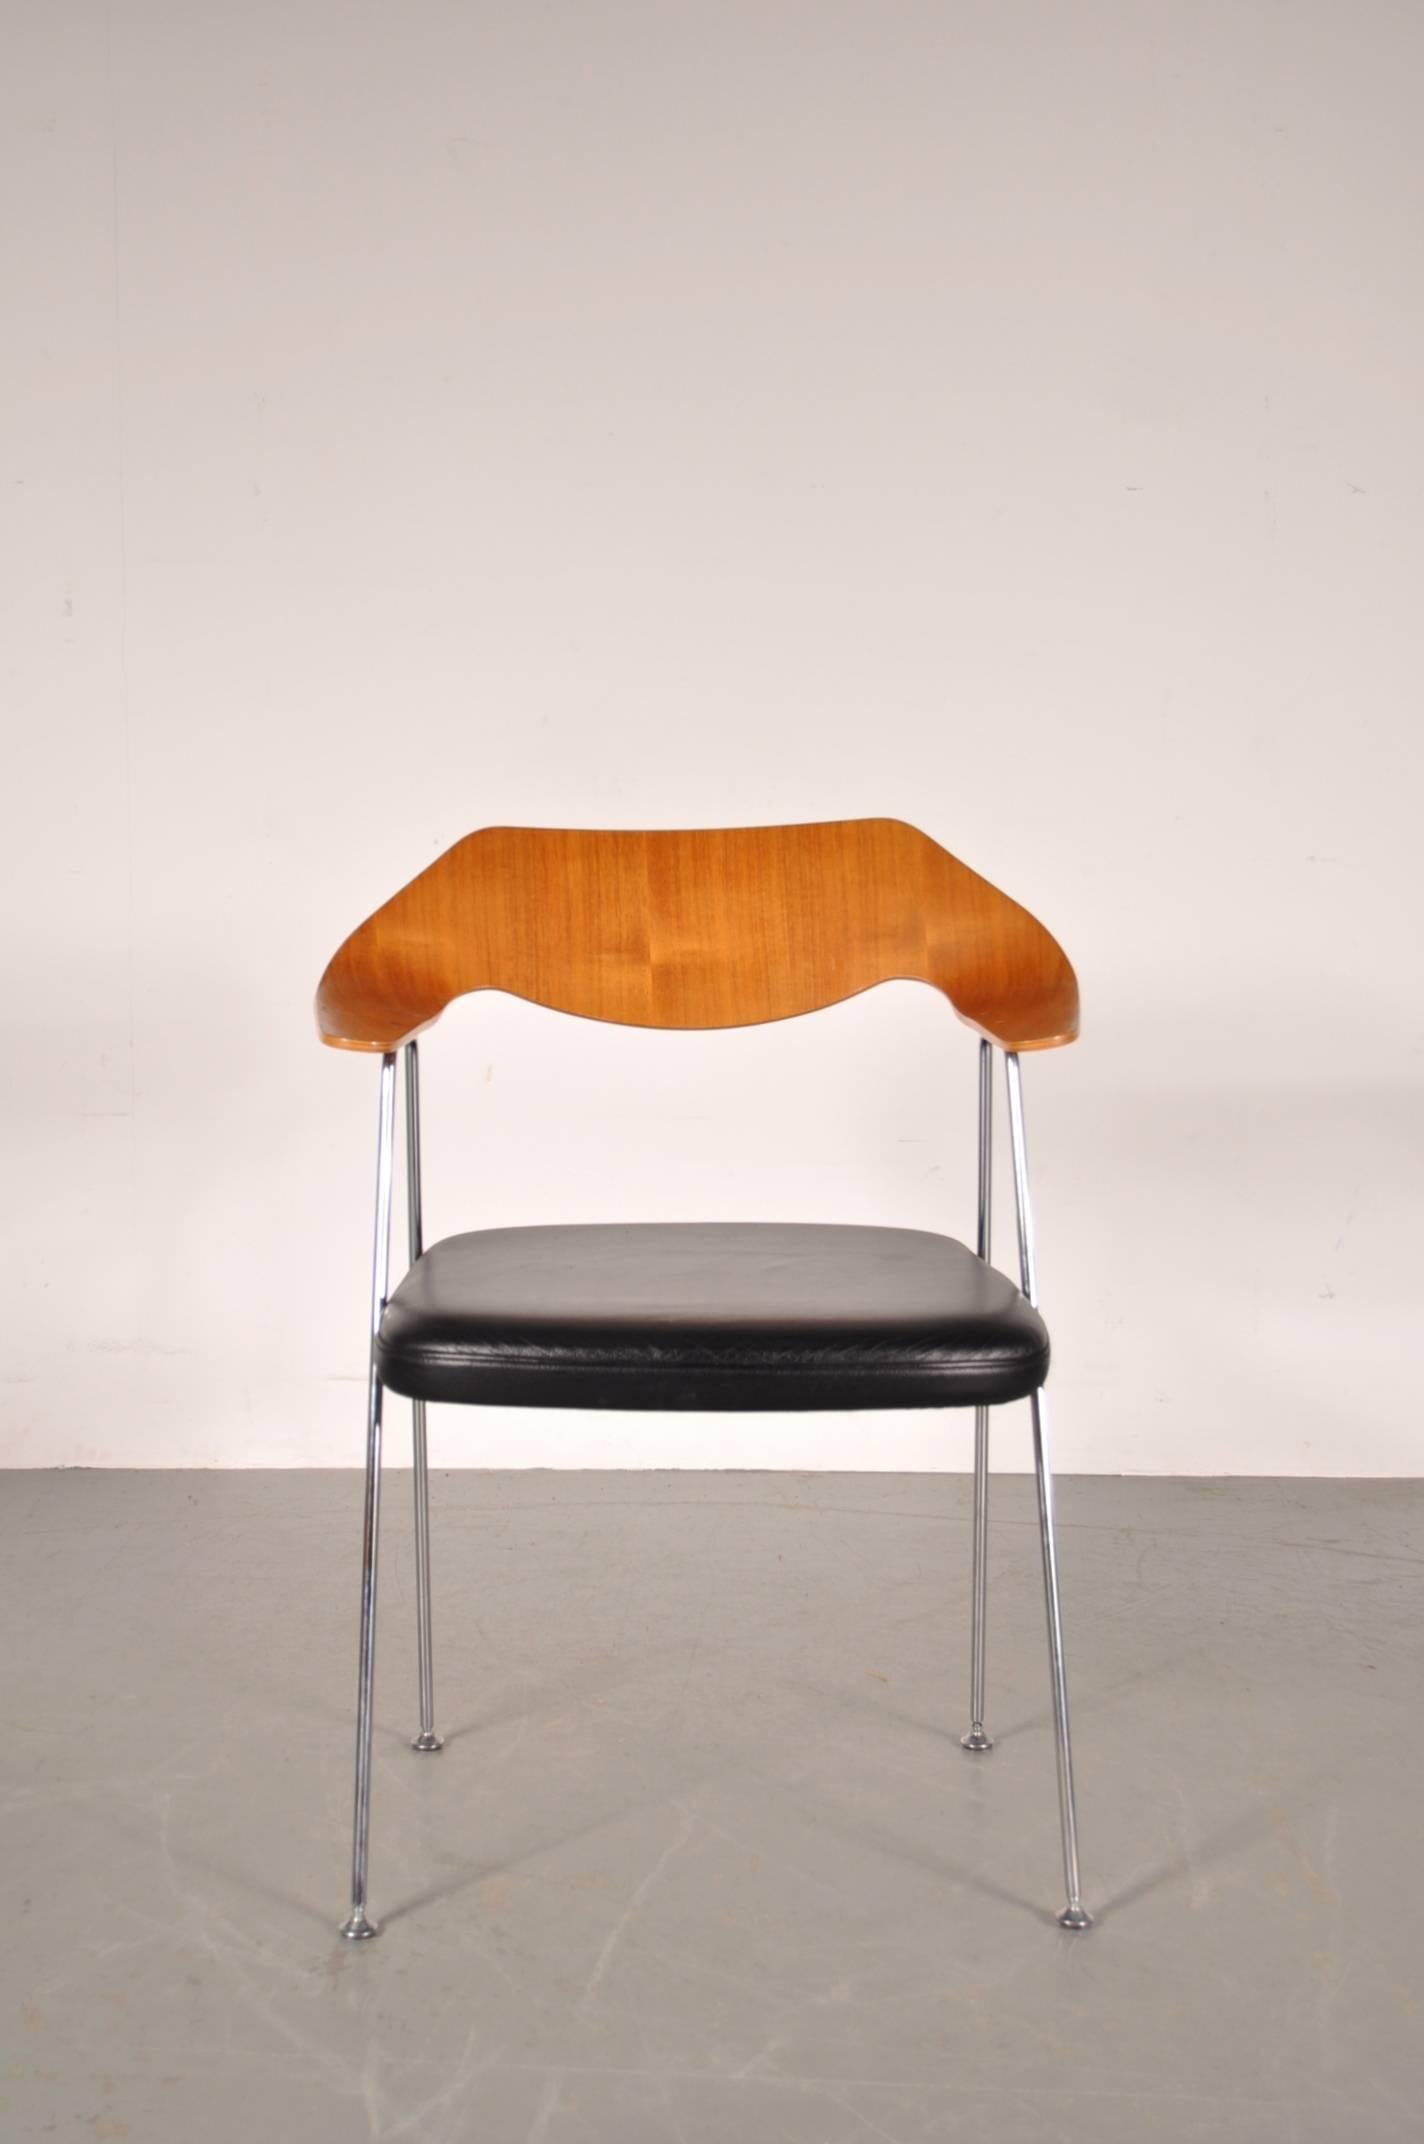 Mid-20th Century Desk / Side Chair by Robin Day for Hille, UK, circa 1950